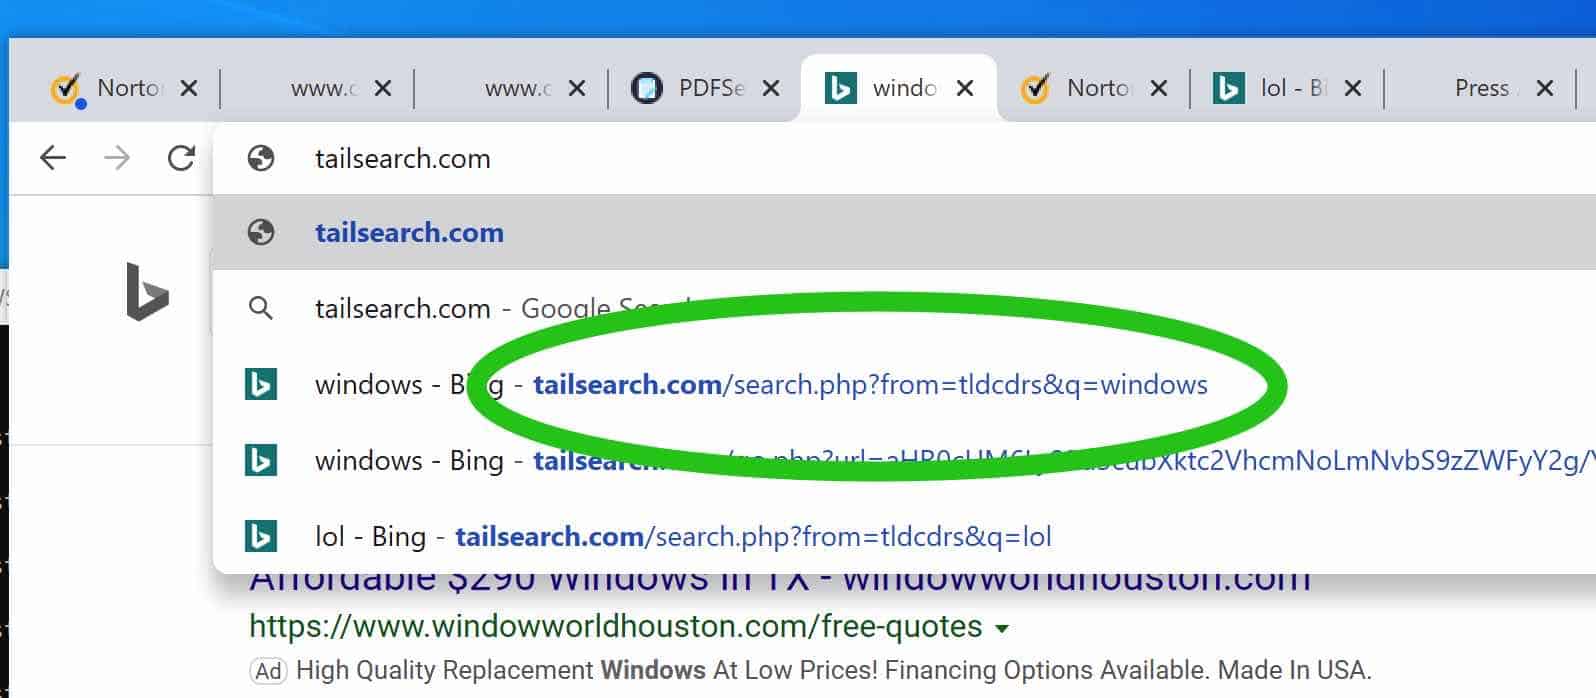 Tailsearch. com